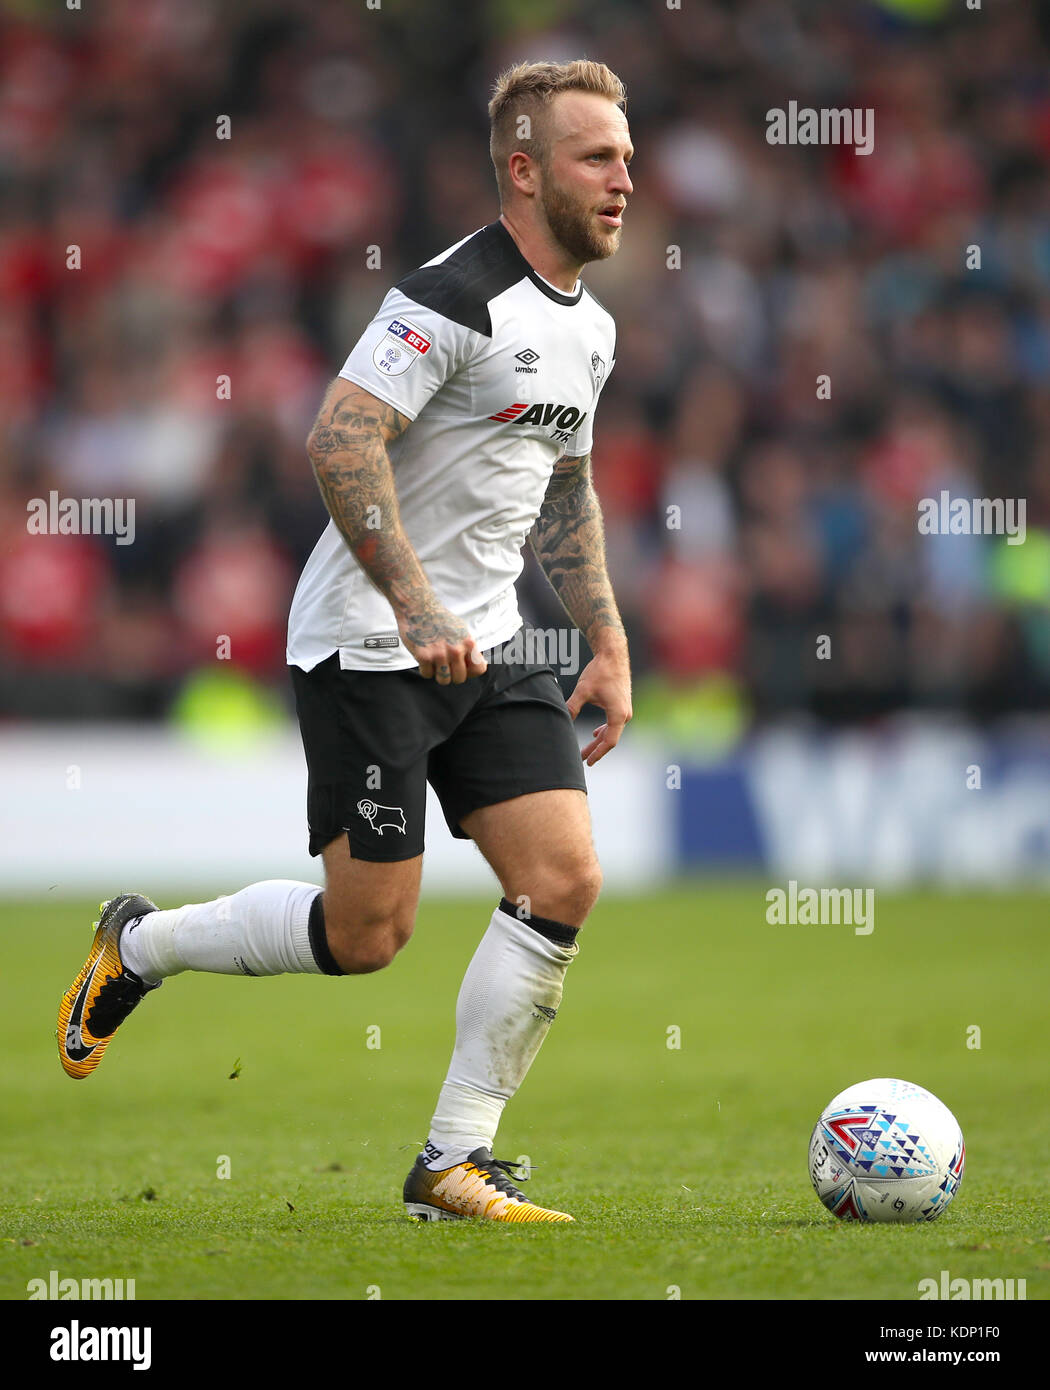 Derby County's Johnny Russell during the Sky Bet Championship match at Pride Park, Derby. PRESS ASSOCIATION Photo. Picture date: Sunday October 15, 2017. See PA story SOCCER Derby. Photo credit should read: Nick Potts/PA Wire. RESTRICTIONS: No use with unauthorised audio, video, data, fixture lists, club/league logos or 'live' services. Online in-match use limited to 75 images, no video emulation. No use in betting, games or single club/league/player publications. Stock Photo